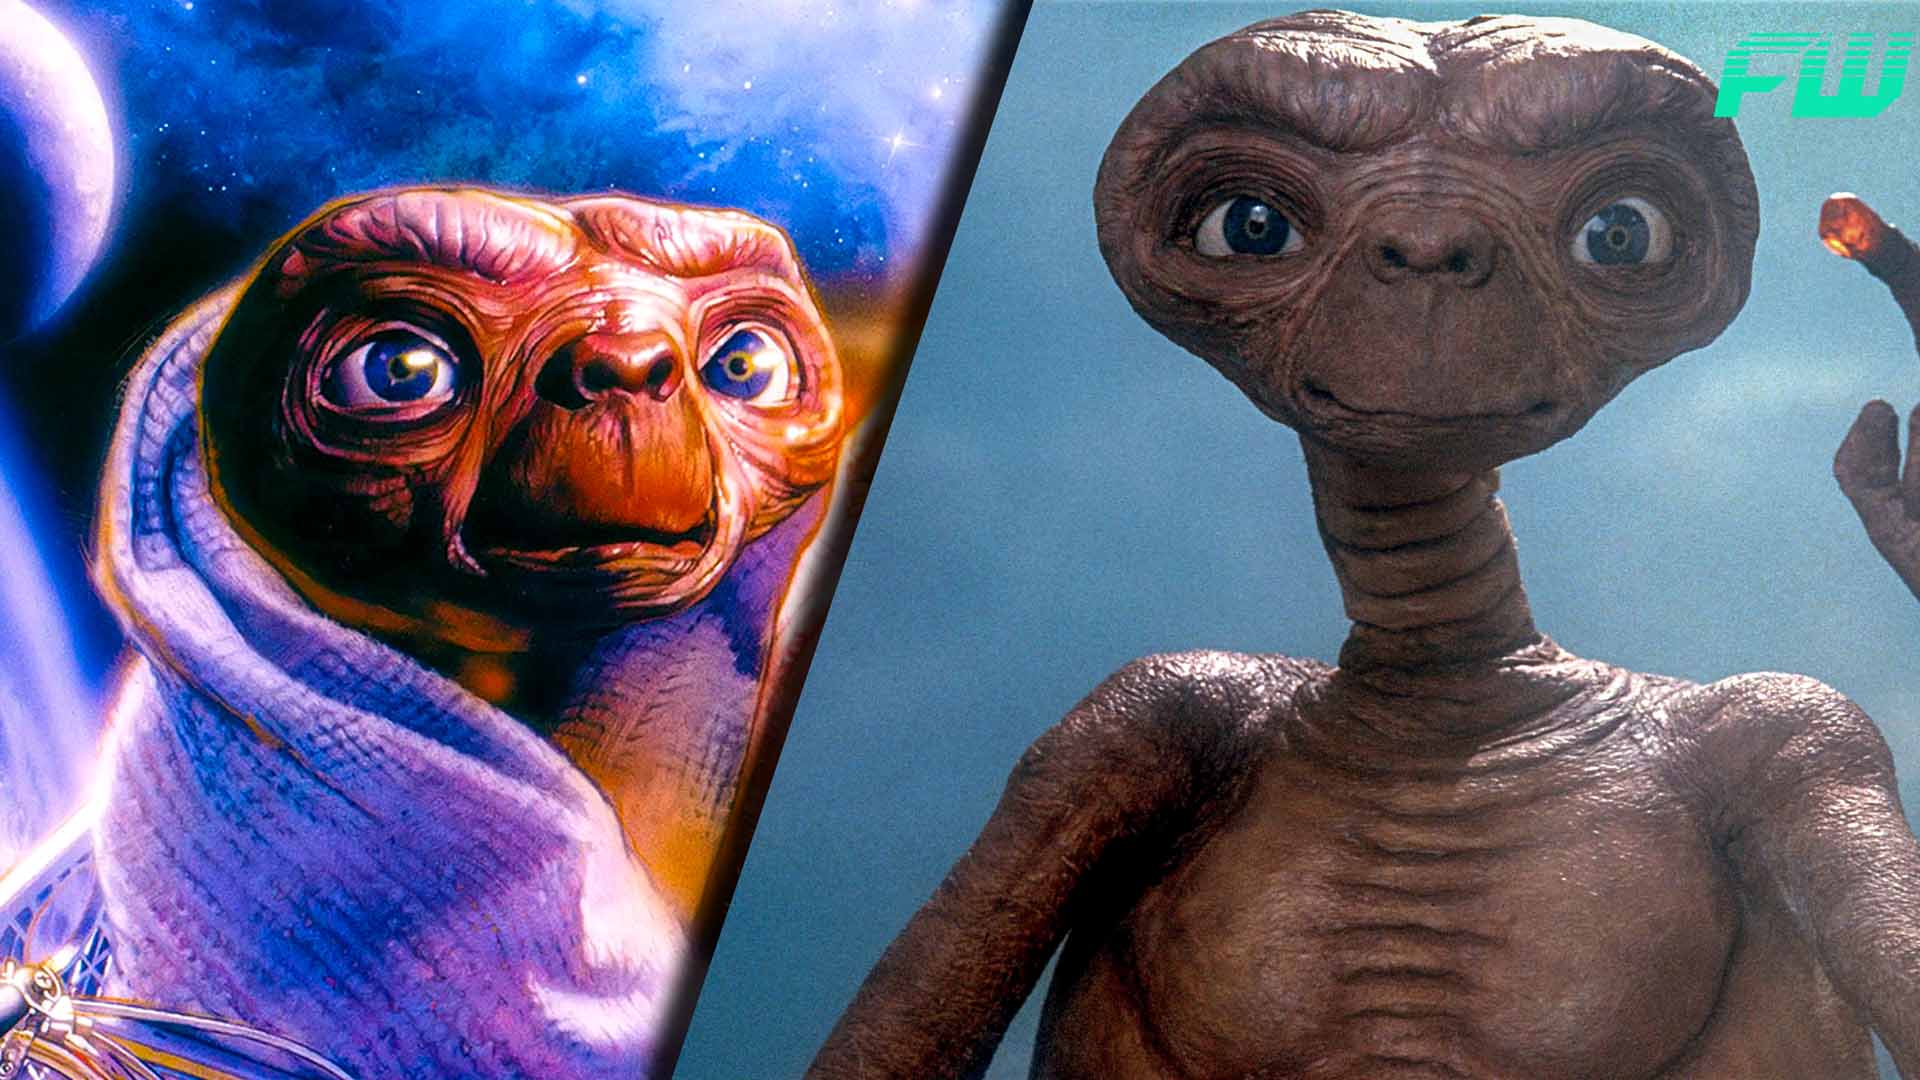 The Dark Story Behind The Cancelled Sequel To E.T. The Extra-Terrestrial